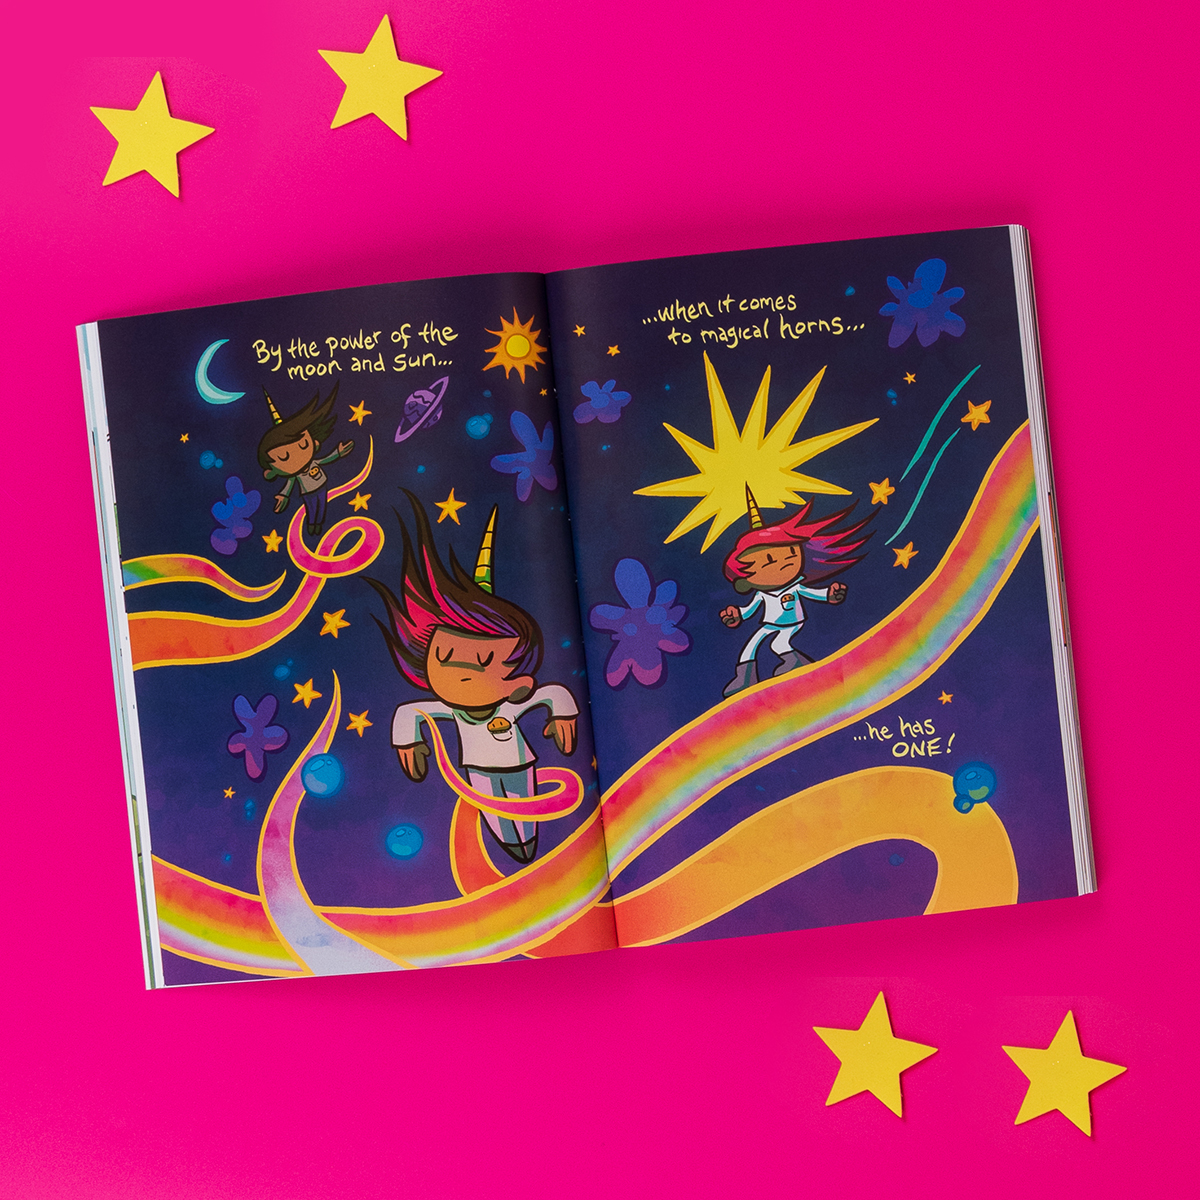 Have you met Unicorn Boy? A colourful new graphic novel featuring singing unicorn horns, talking muffins and shadowy creatures from other realms. Perfect for wannabe superheroes everywhere! Out now: brnw.ch/21wJeRB #UnicornBoy @yaytime